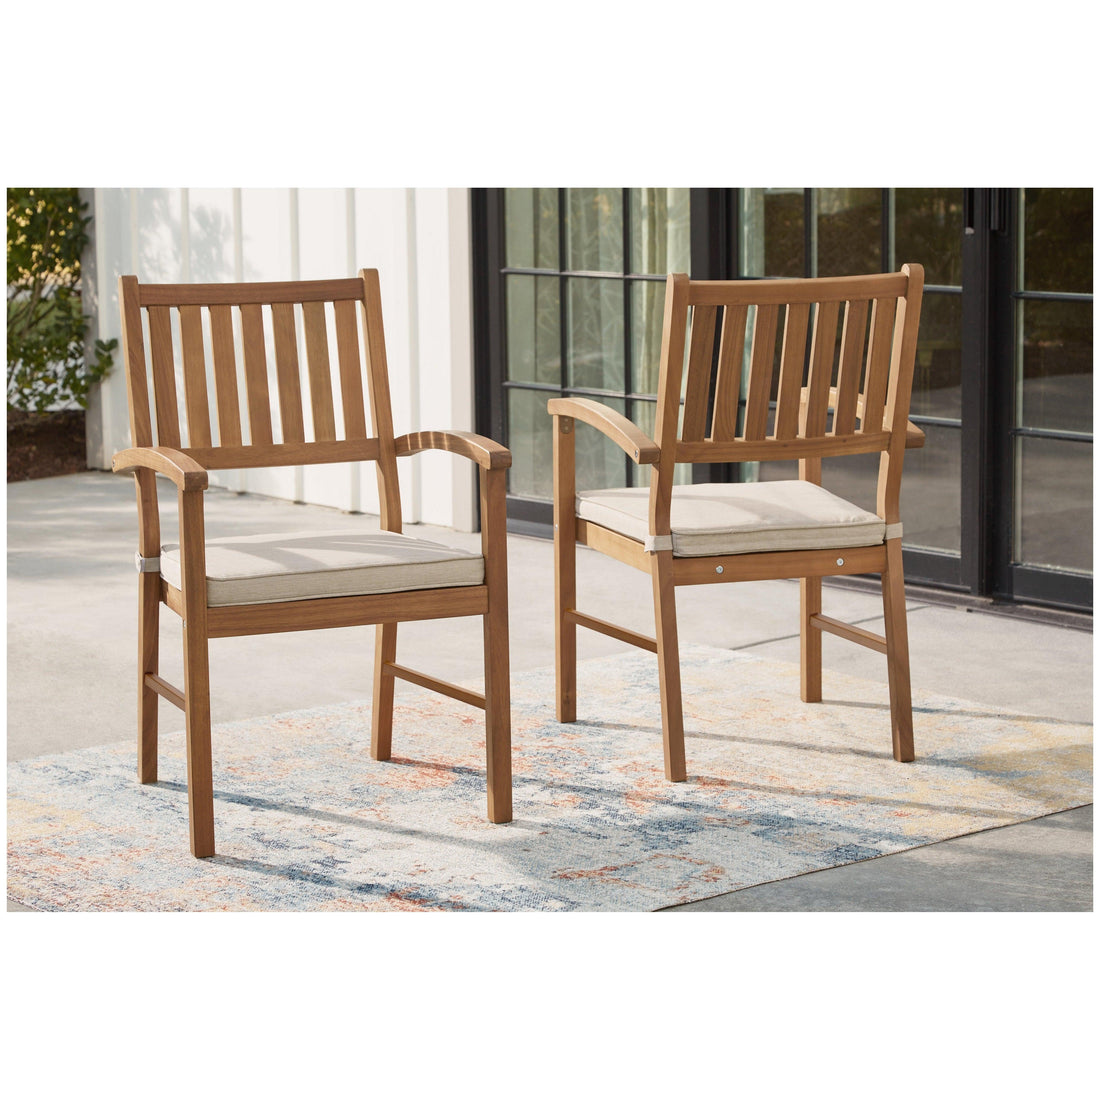 Janiyah Outdoor Dining Arm Chair (Set of 2) Ash-P407-601A